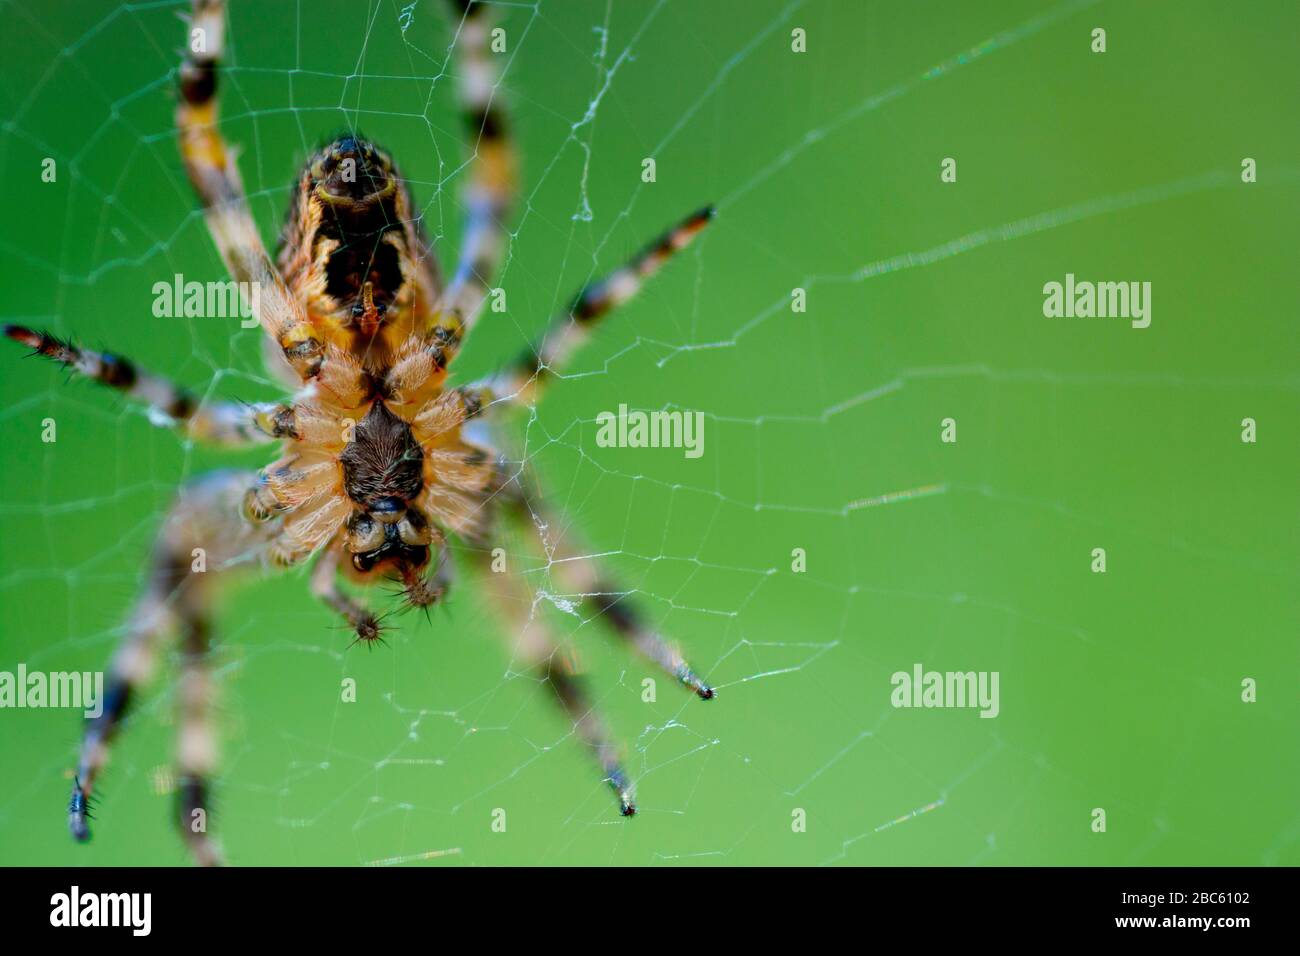 The european garden spider (Araneus diadematus) sitting in the spider net on green background and selective focus Stock Photo